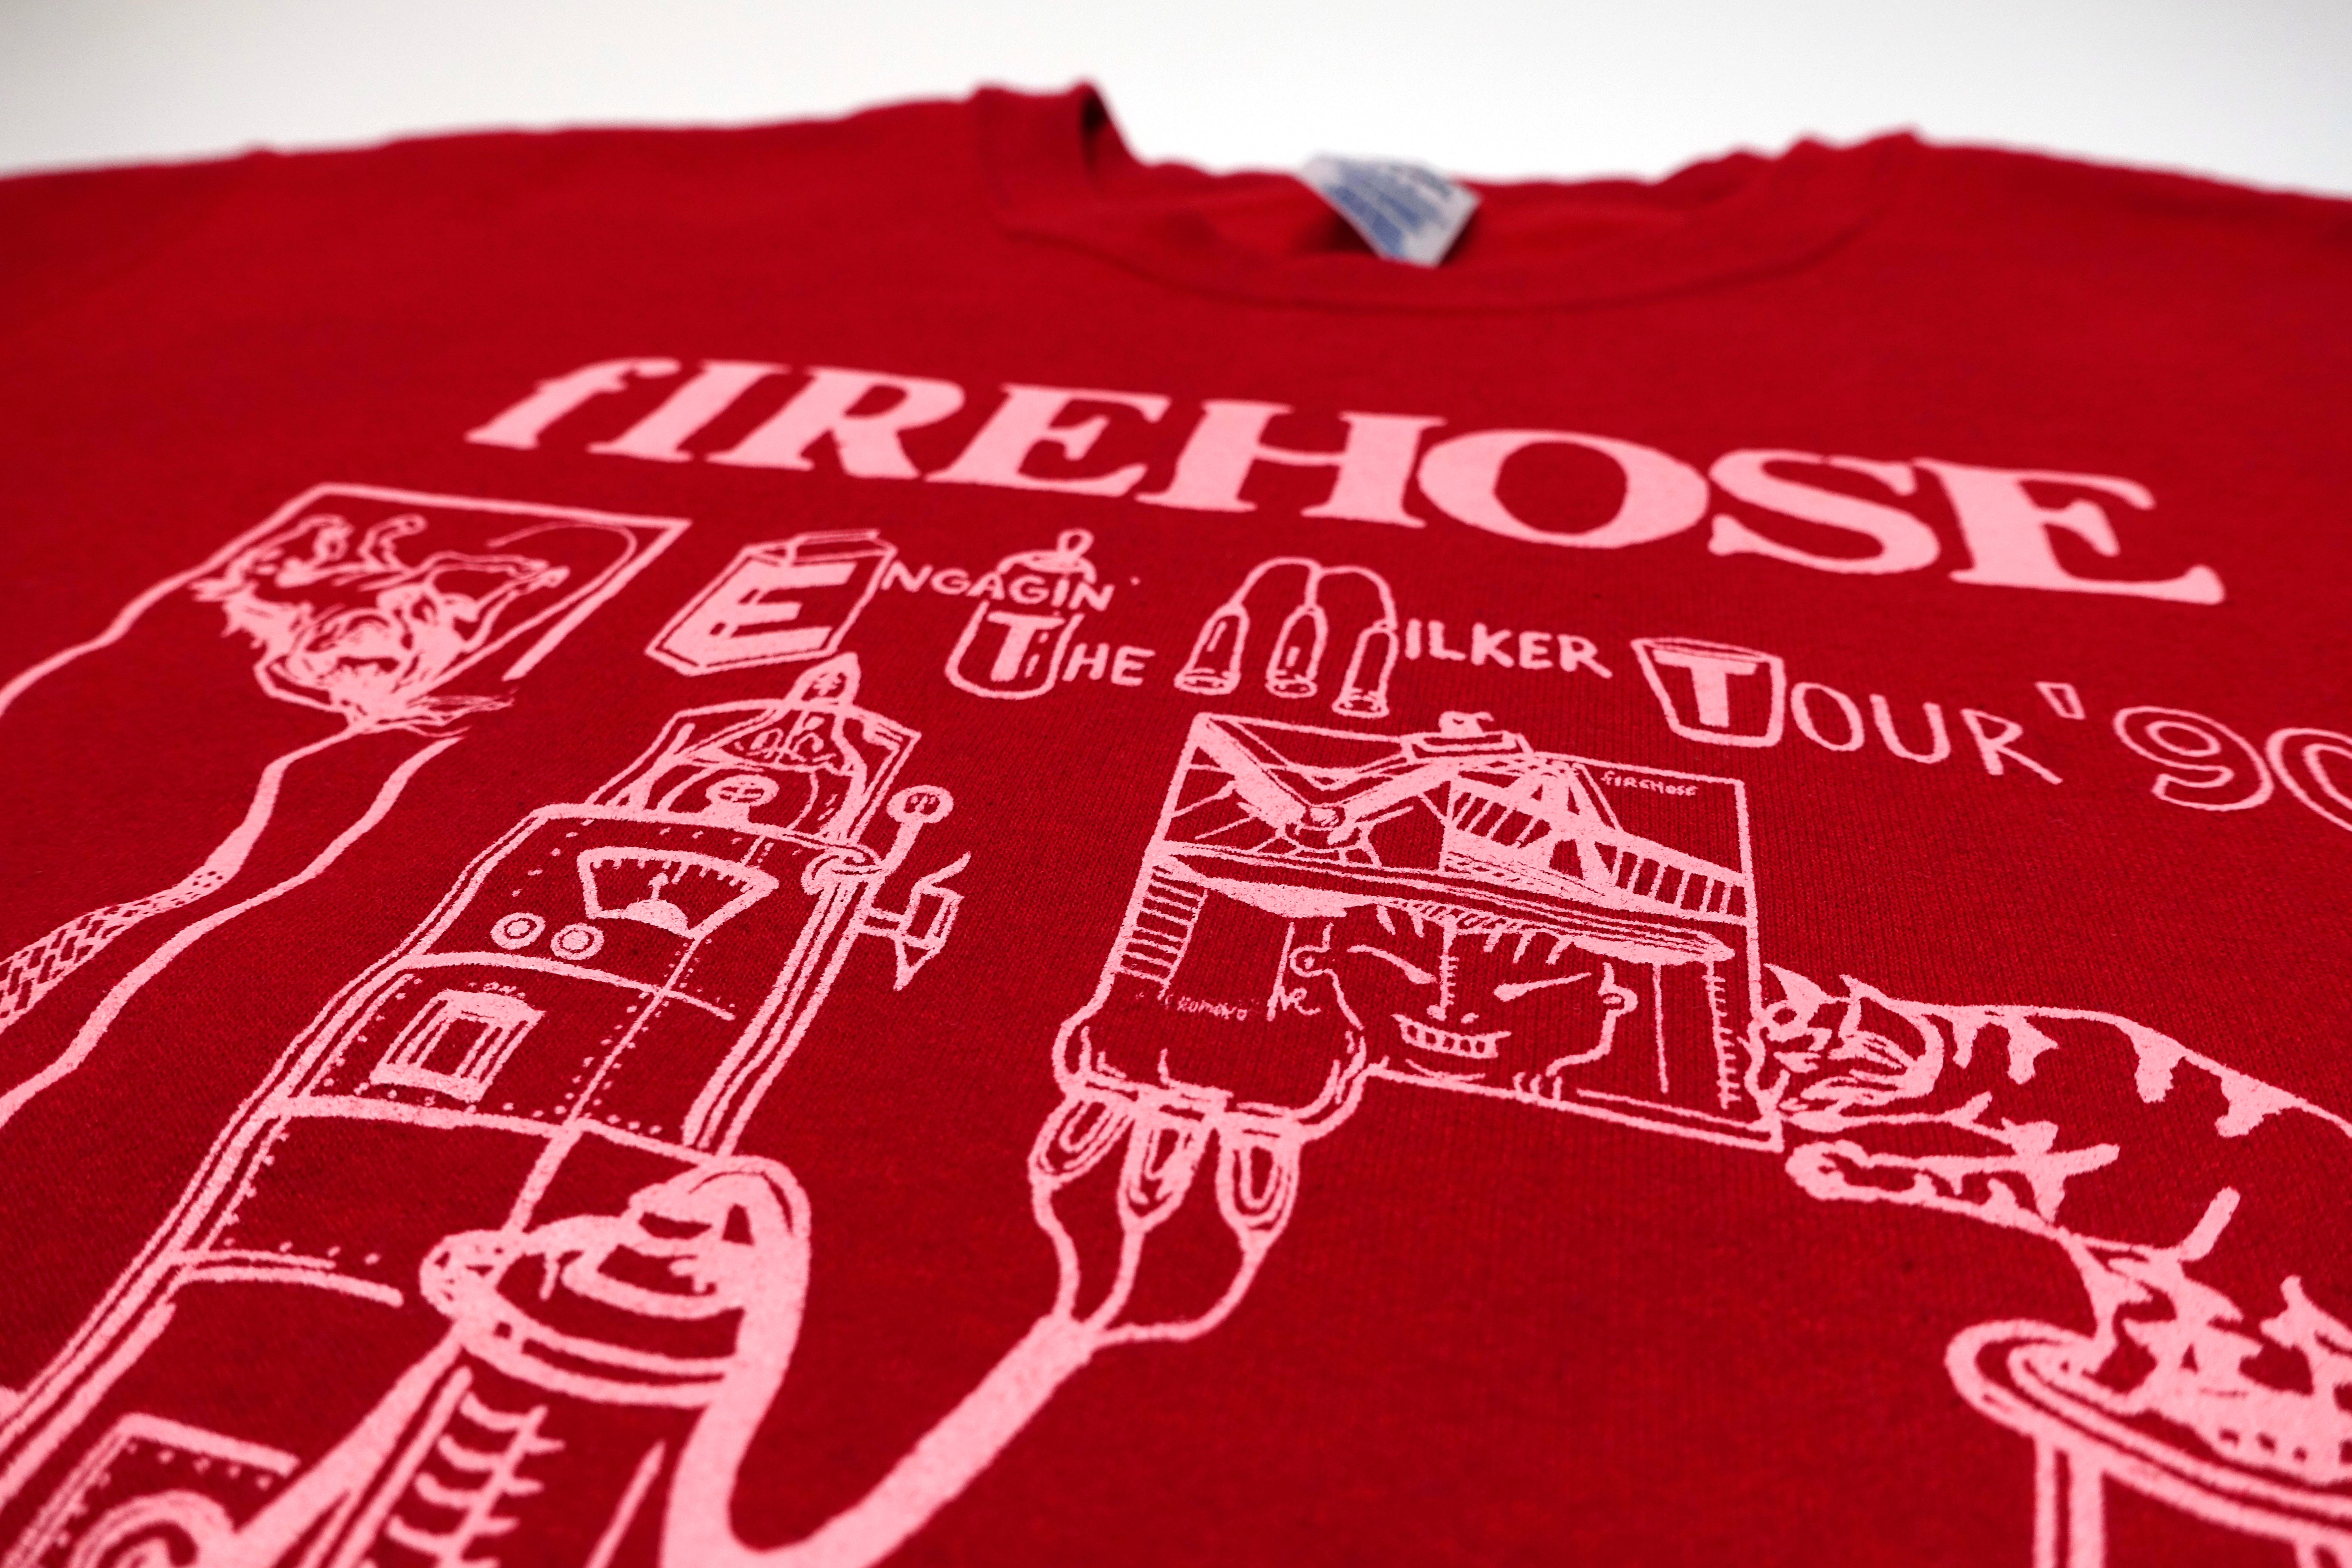 fIREHOSE - Engagin' the Milker 1990 Tour (Bootleg By Me) Sweat Shirt Size Large